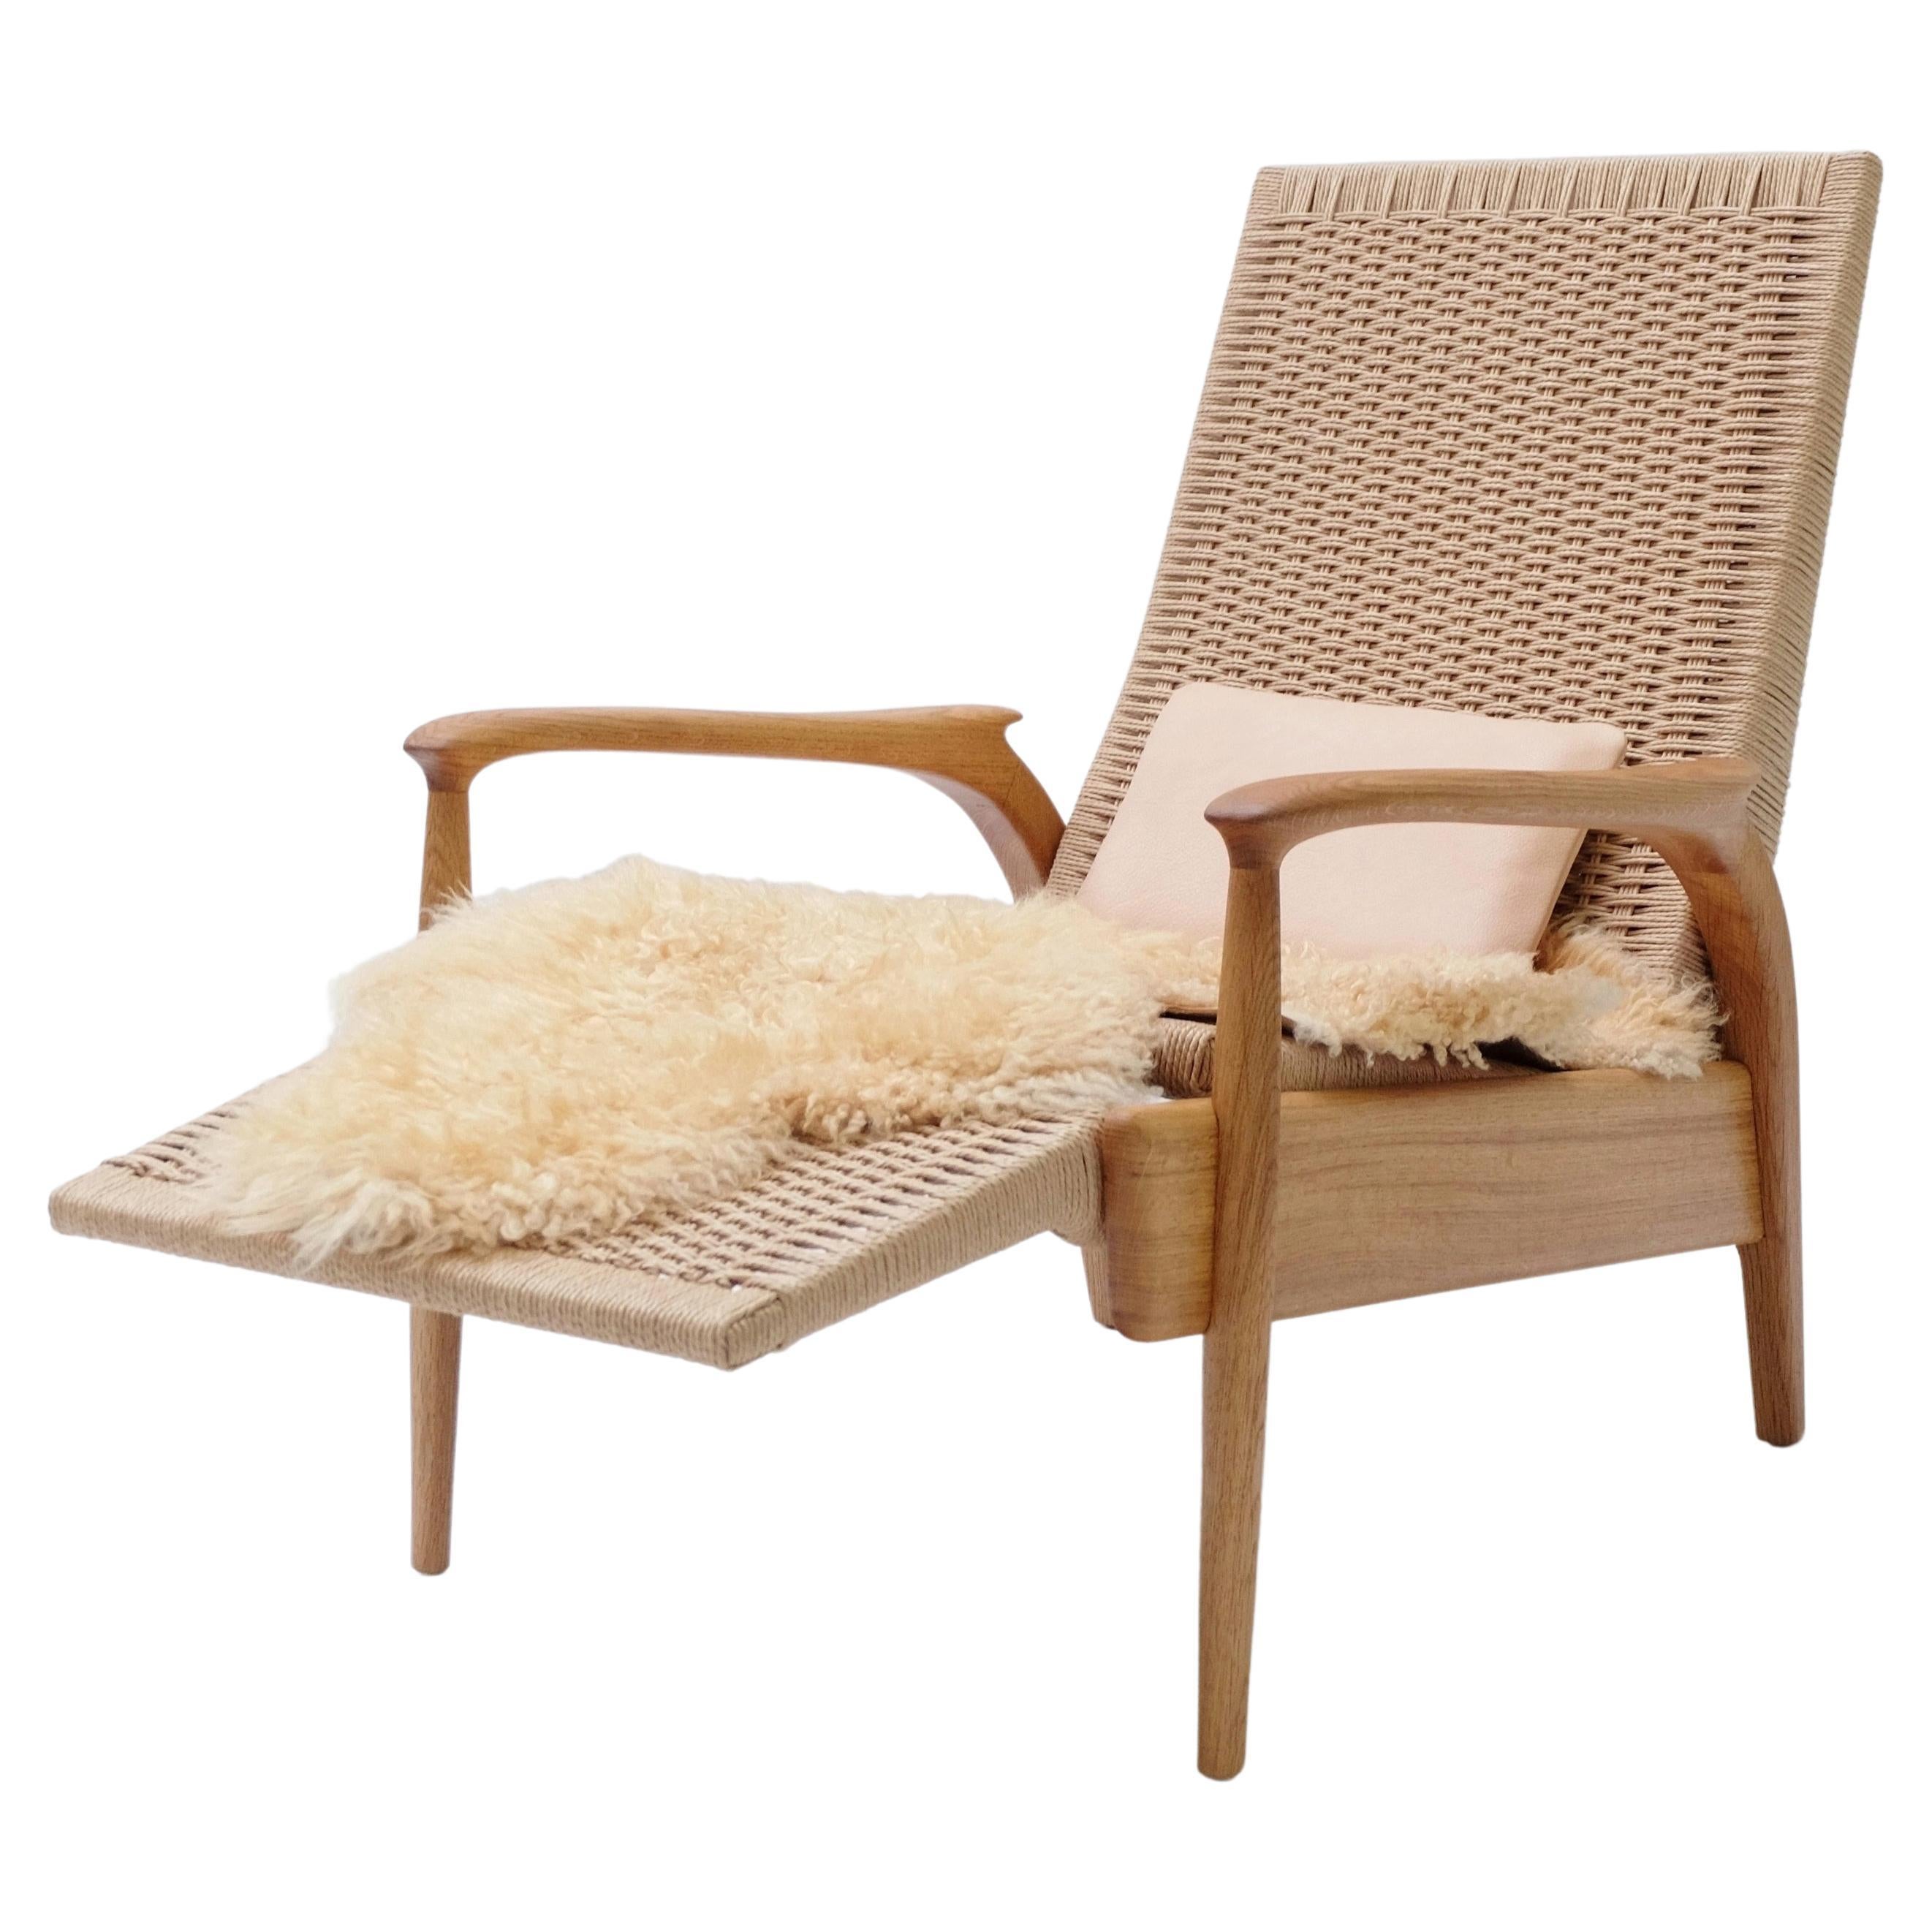 Custom-Made Handwoven Reclining Lounge Chair in Solid Oak& Natural Danish Cord For Sale 1